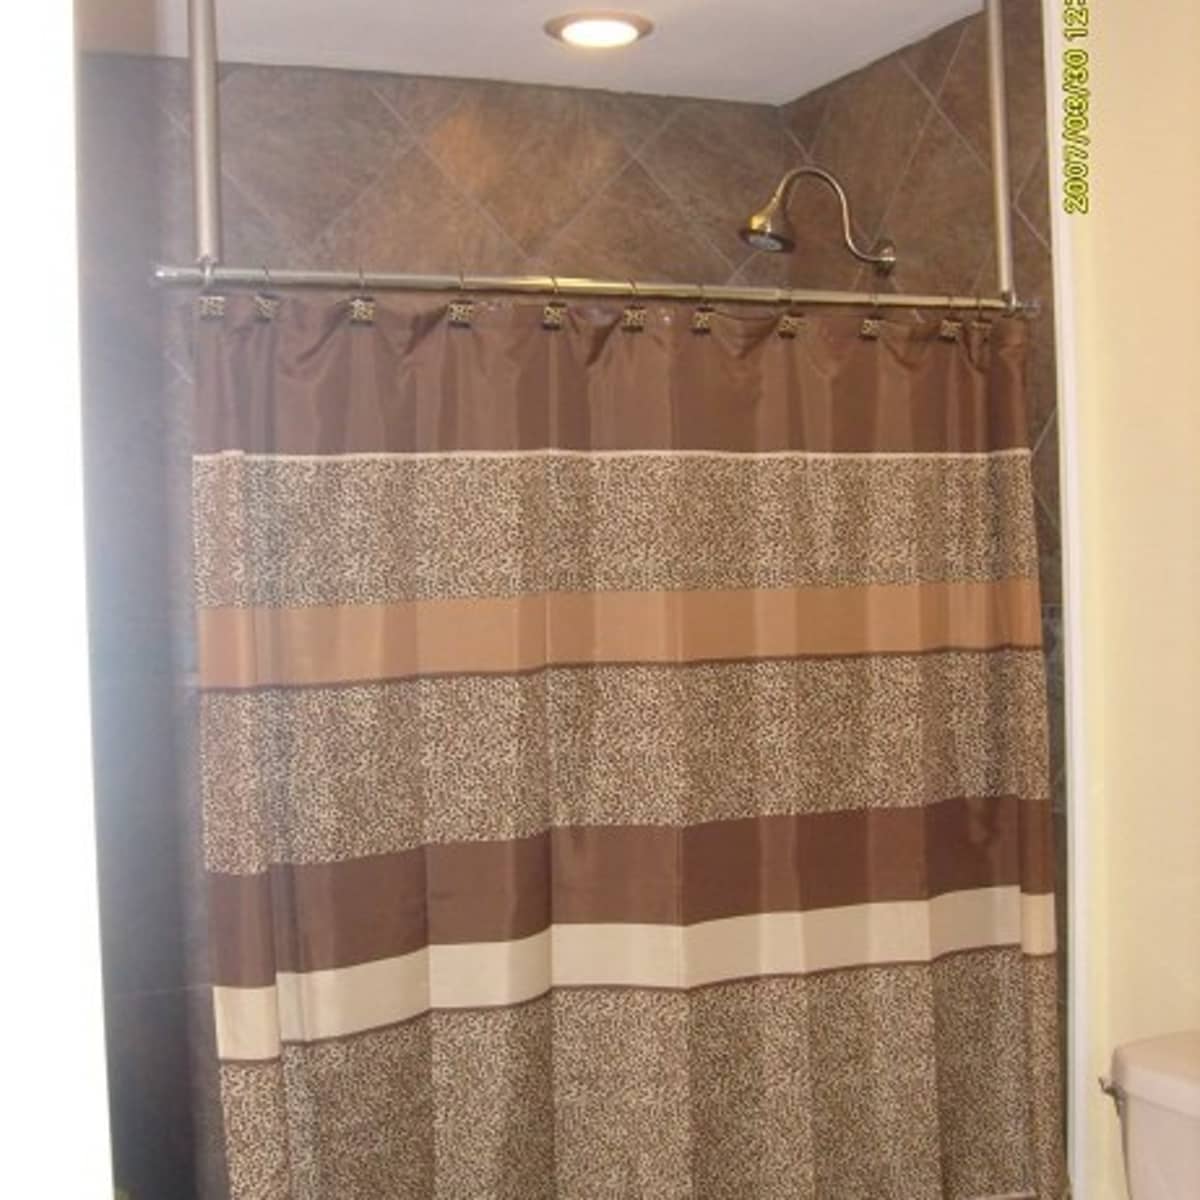 How to install a ceiling-mounted shower curtain